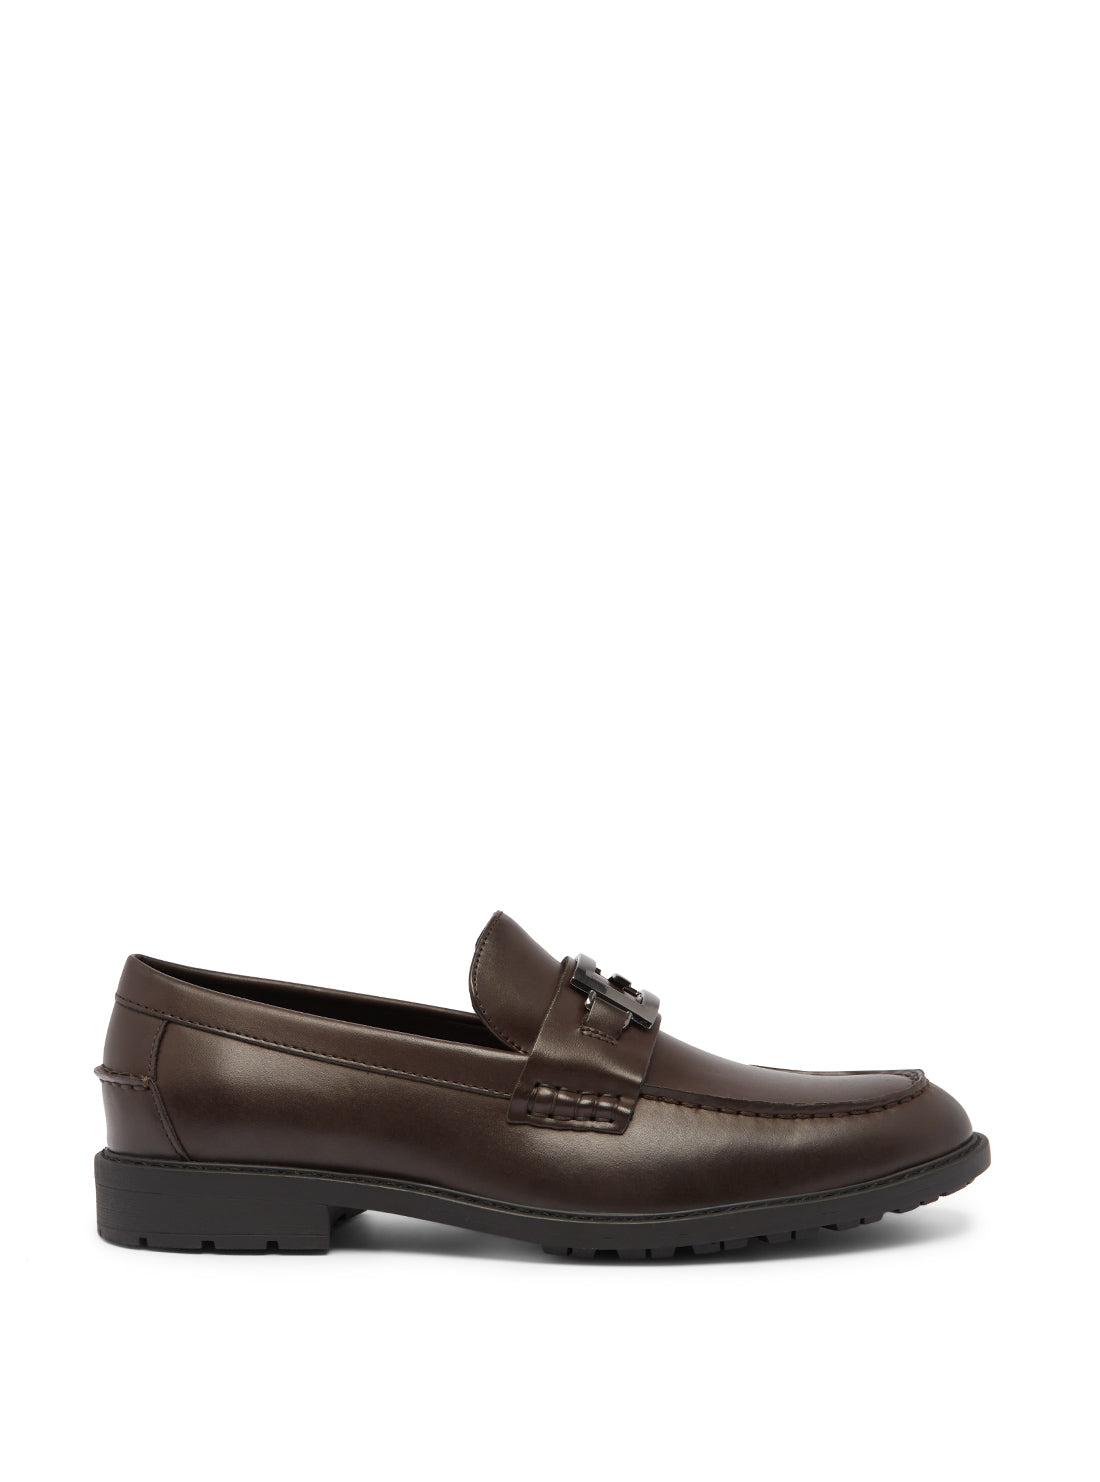 GUESS Brown Dremmer Loafers side view